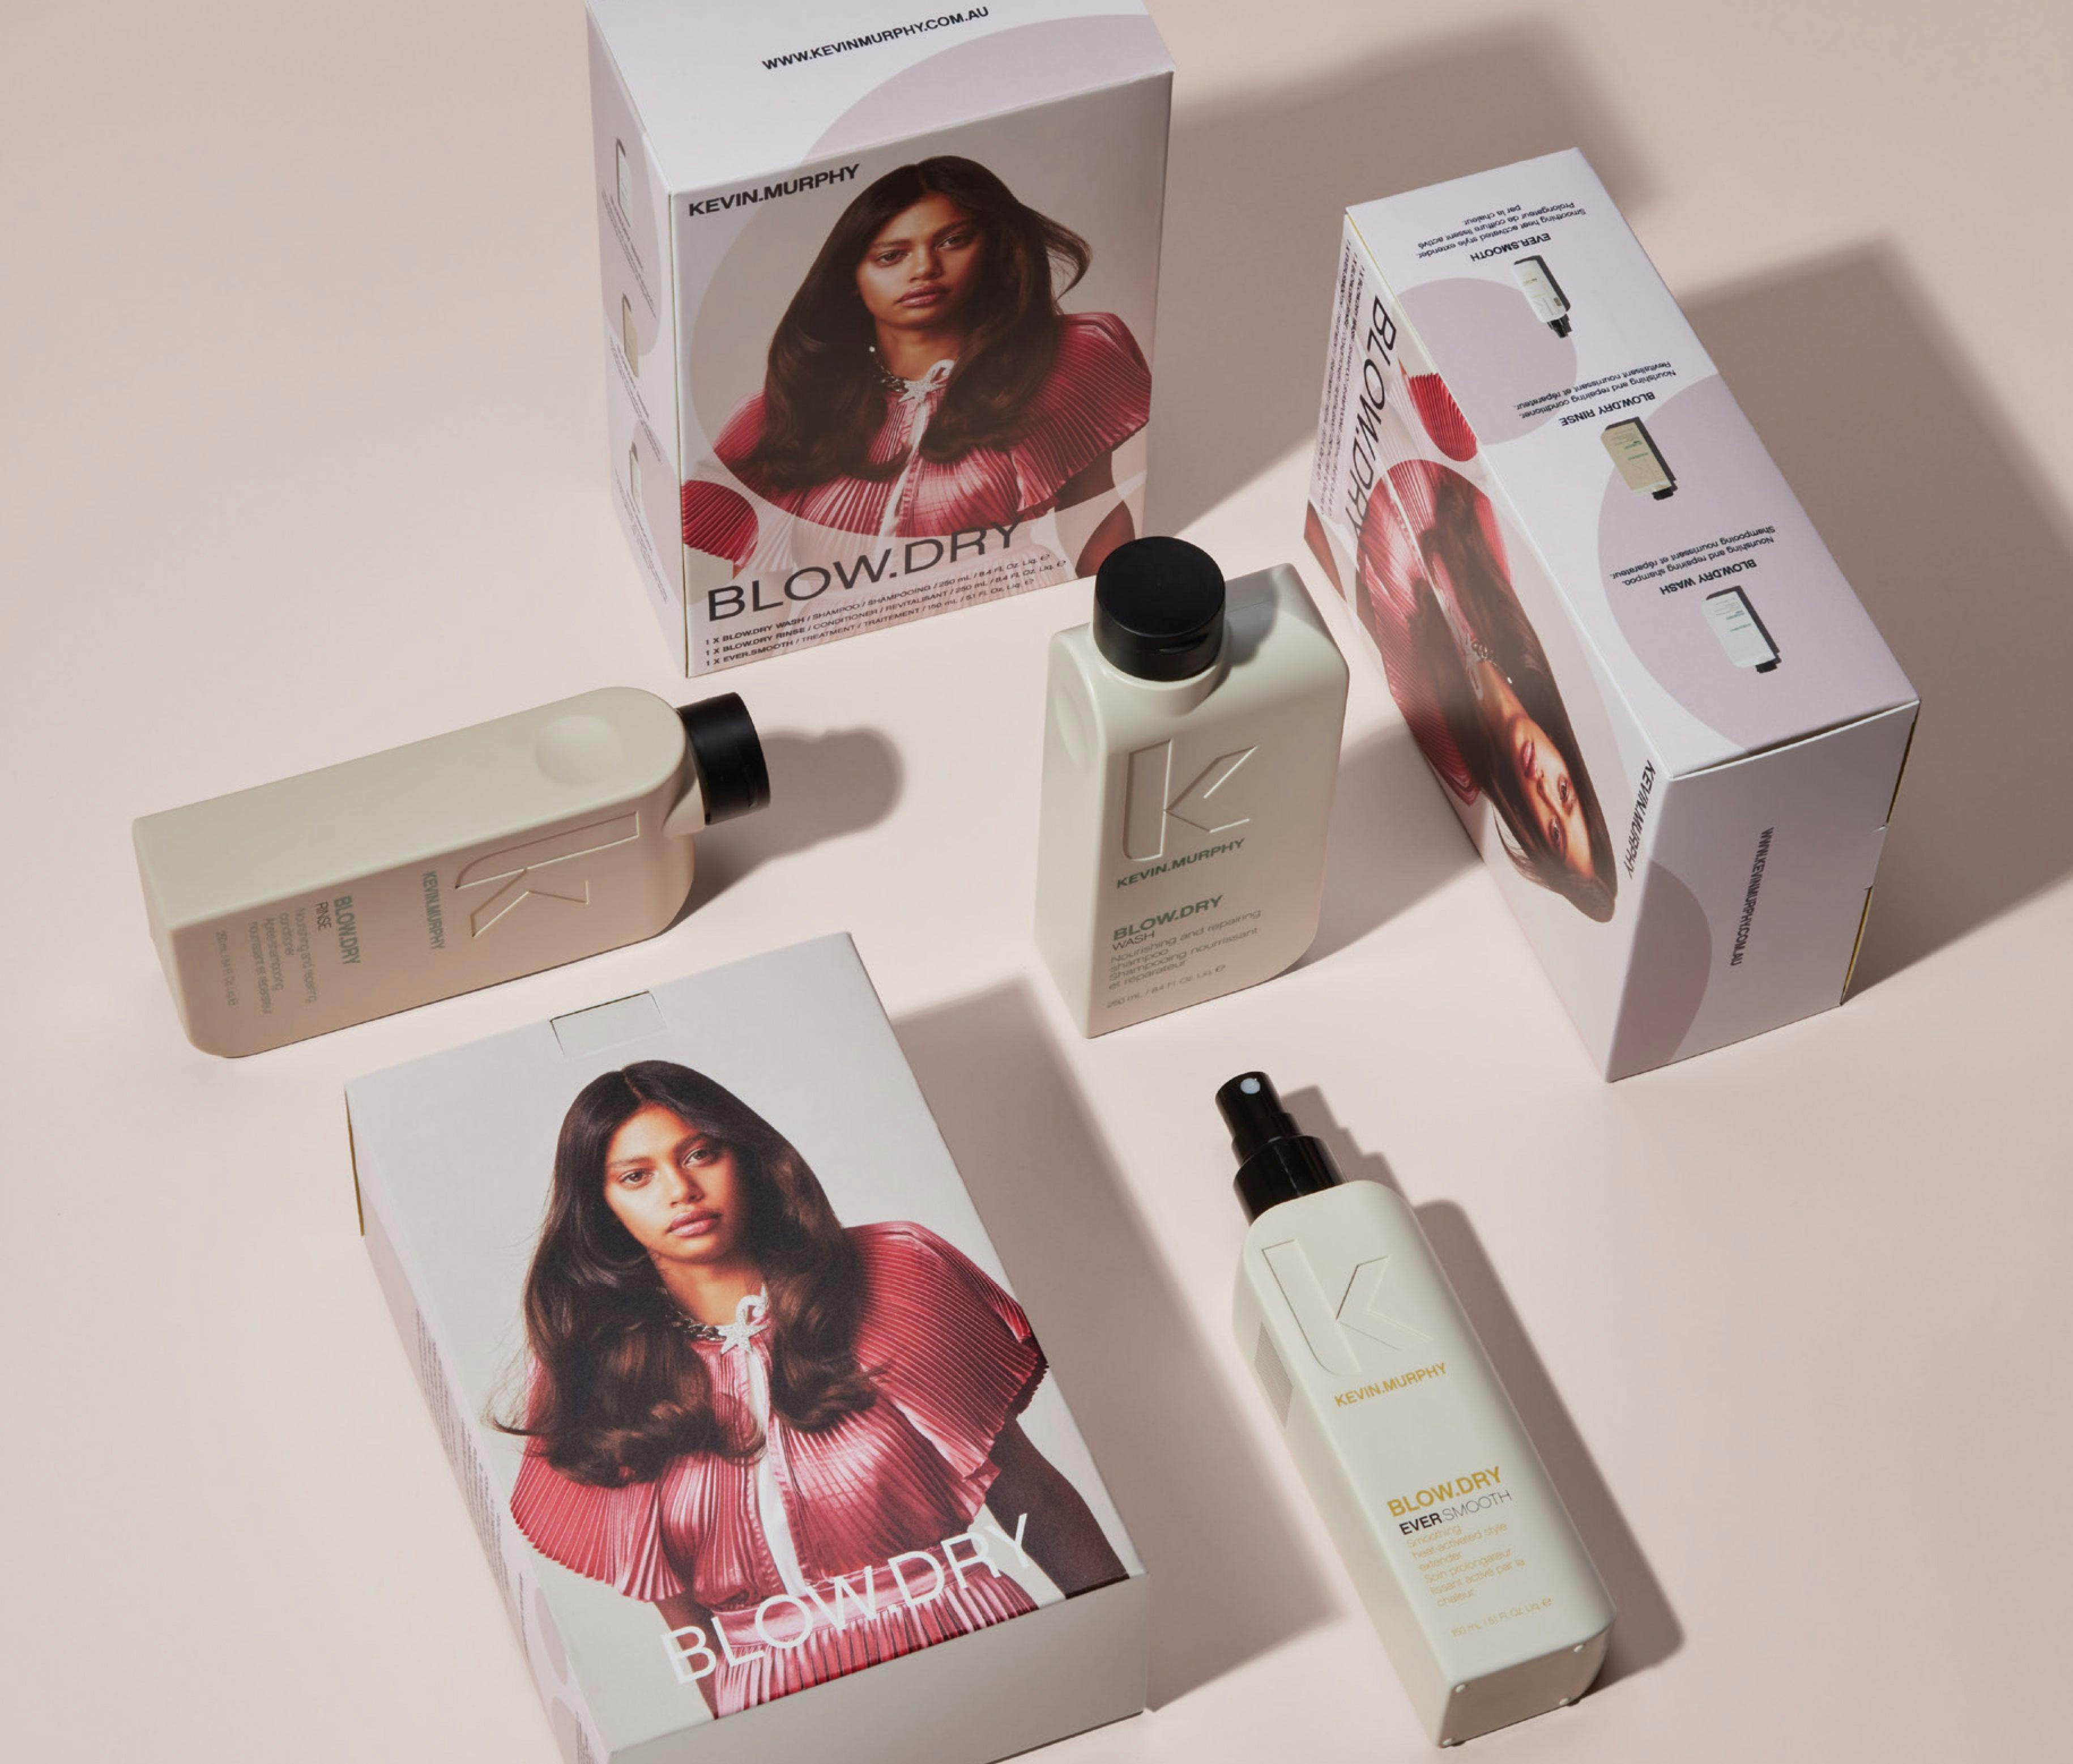 Kevin Murphy Holiday Blow.Dry Trio Pack